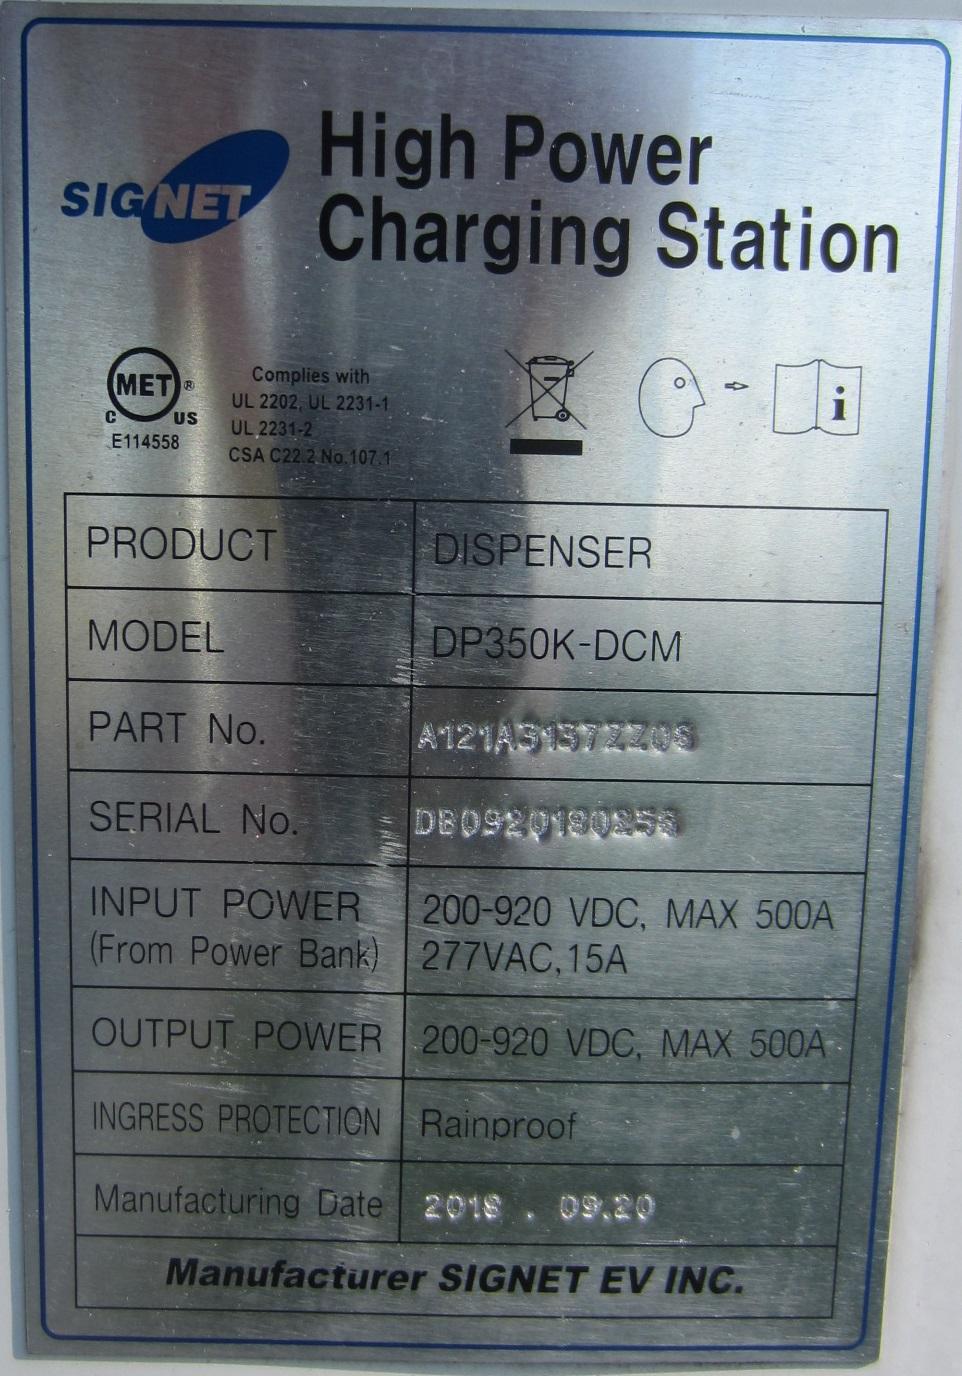 Close-up of a charging station label

Description automatically generated